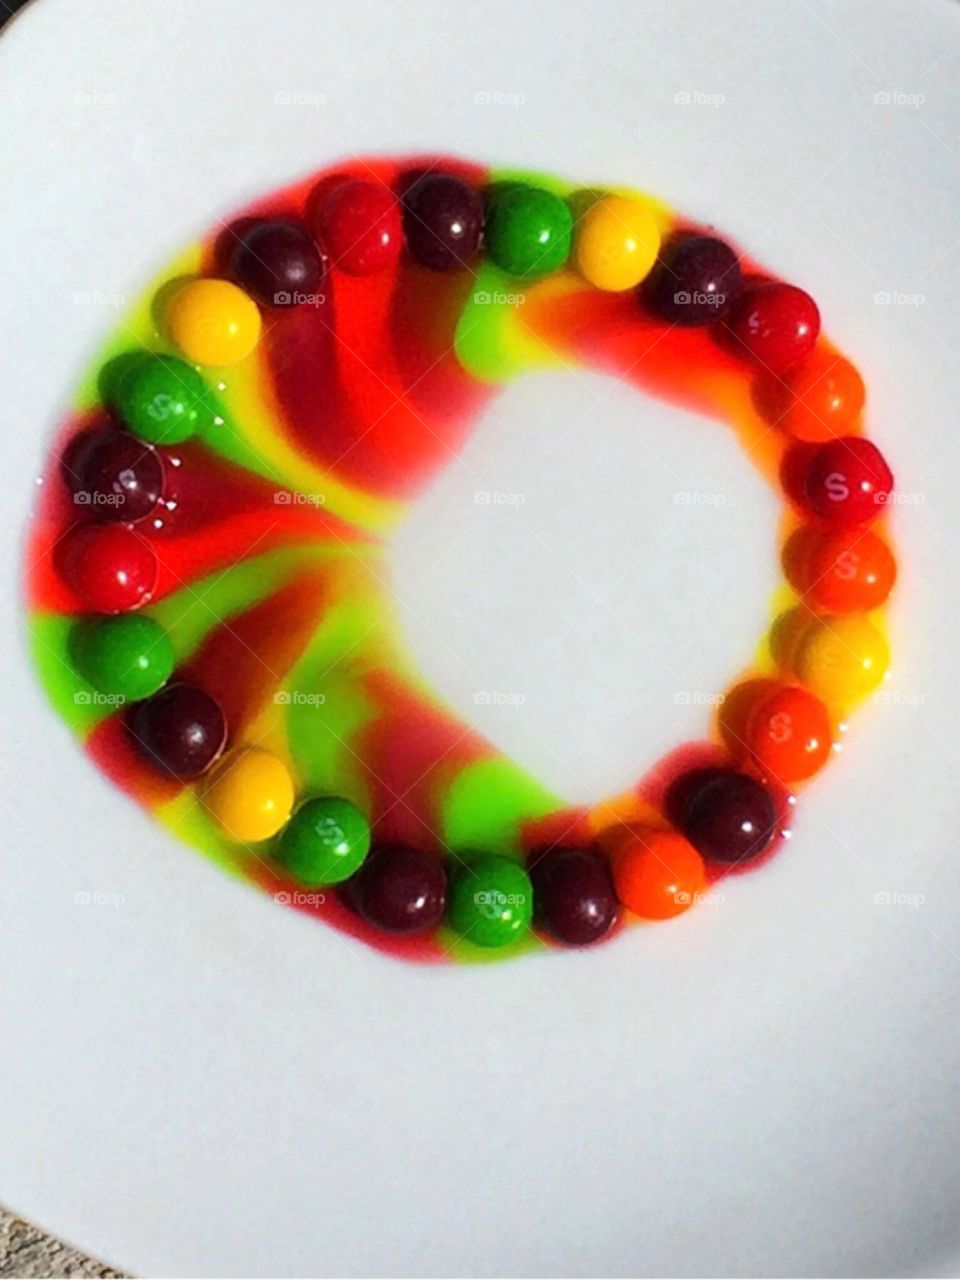 Well documented skittle experiment 